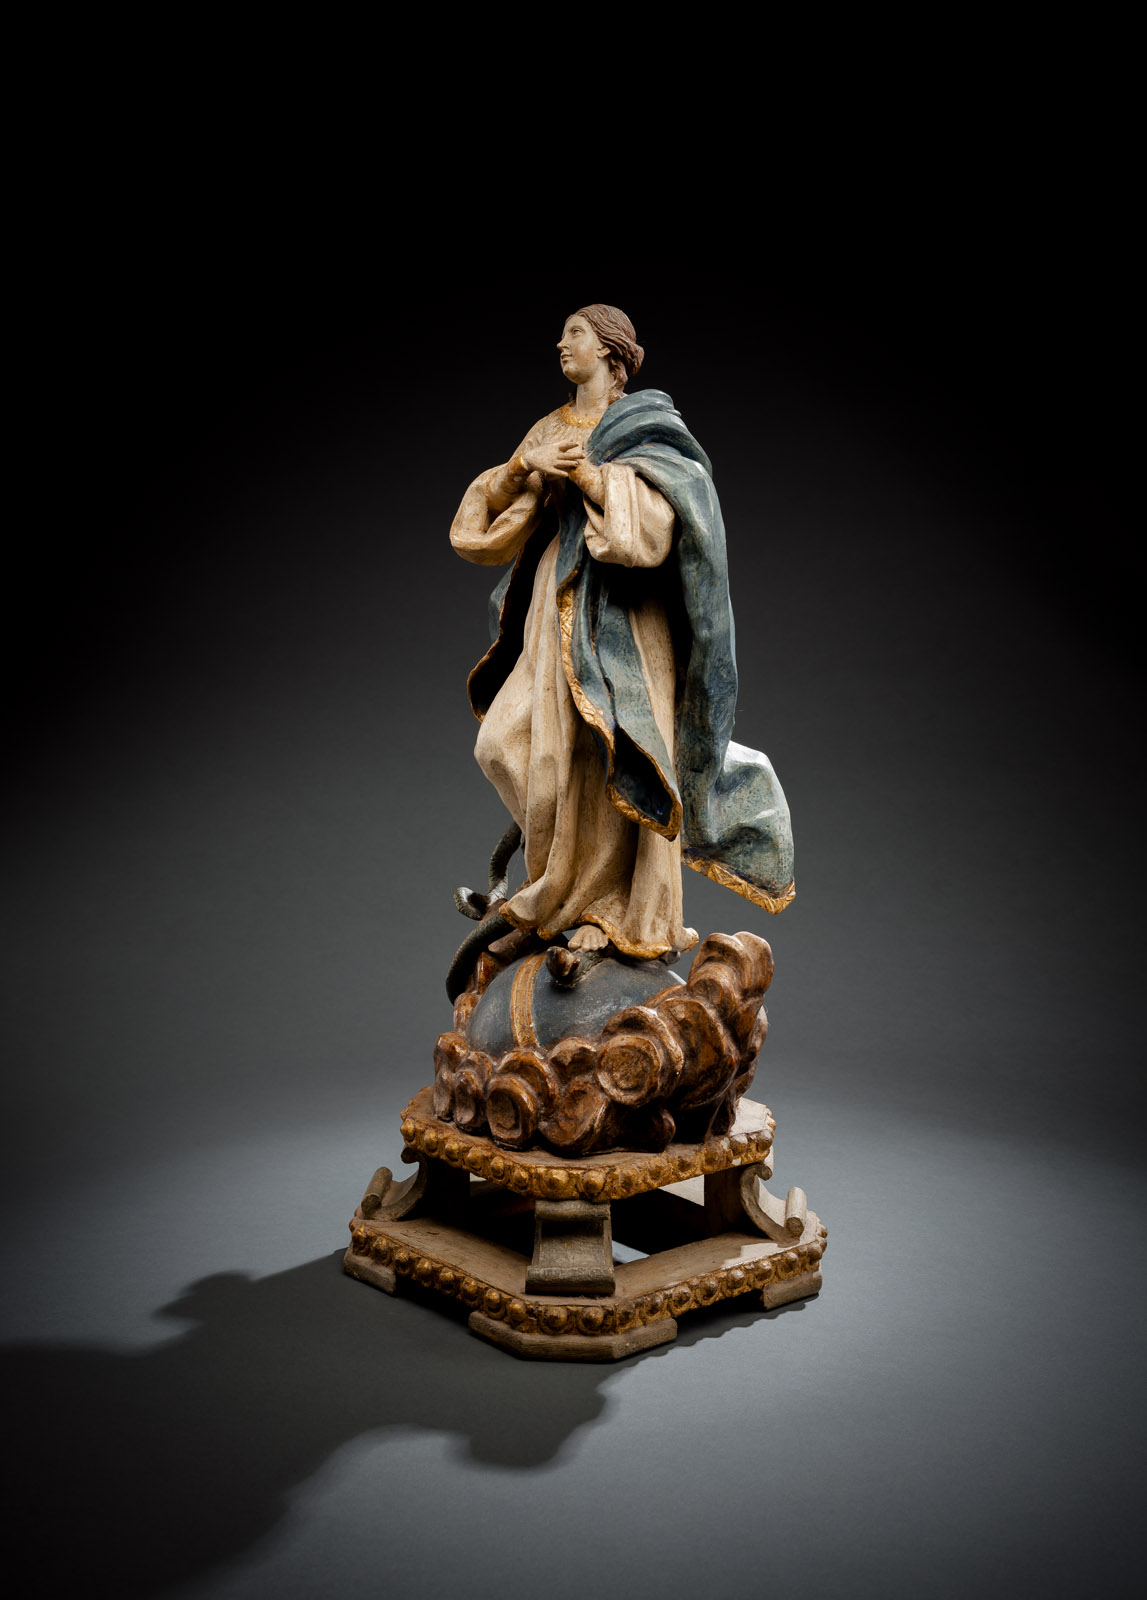 A FINE BAROQUE SCULPTURE OF ST. MARY IMMACULATE - Image 4 of 5